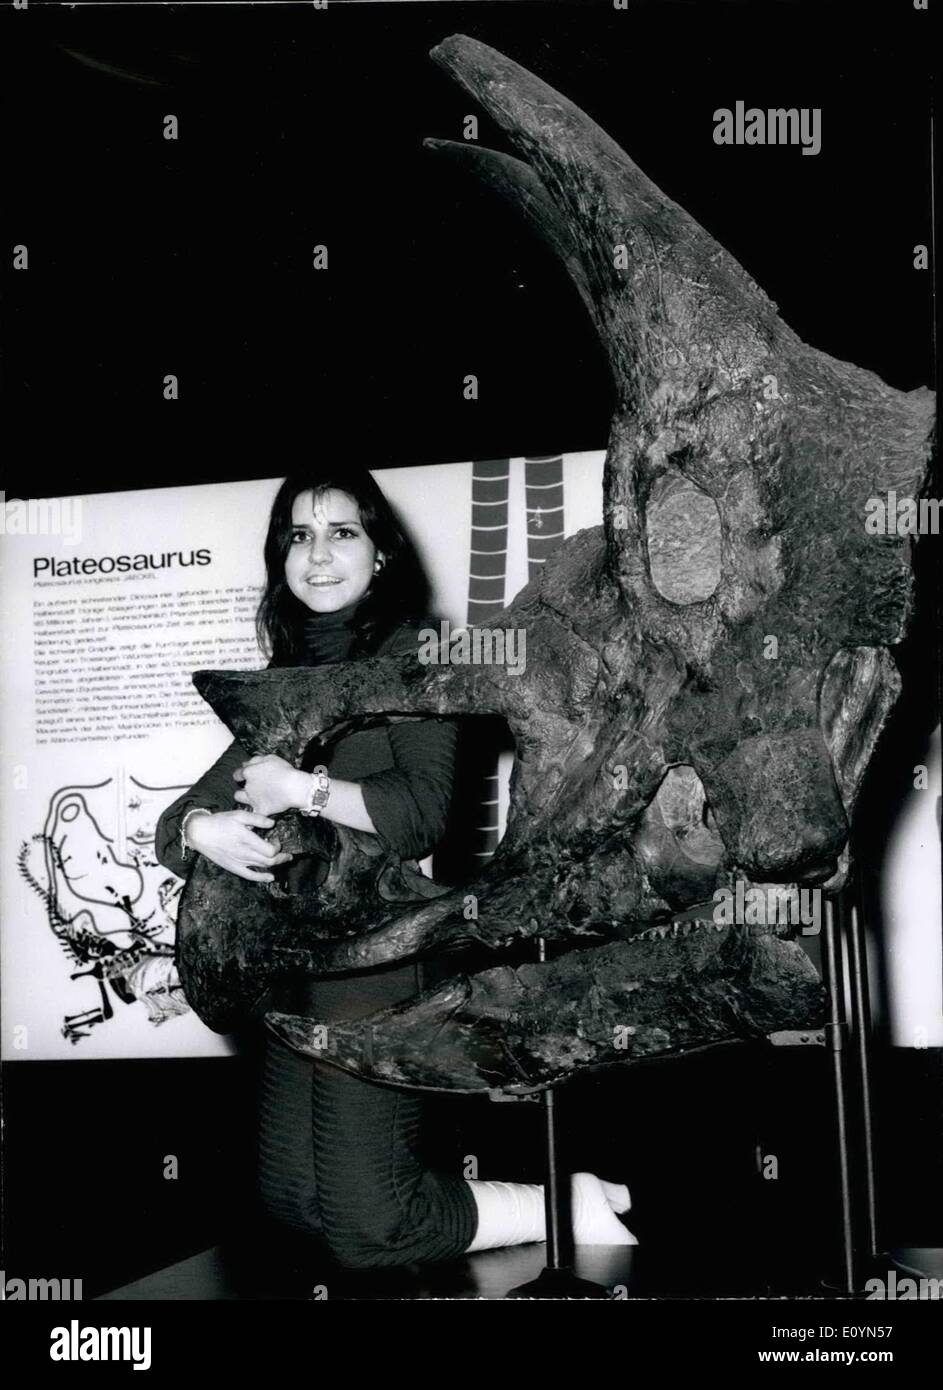 Nov. 11, 1970 - Young Singer Tina York in the Senckenber-Museum Tina York is very interested in (died out) animals. In Francfurt's Senokenberg-museur which io said to be the moderneot ecientifio museum of Europe, the 16-year-old singer has a good opportunity to satisfy her urge for knowledge and to let impress herself by the marvellous head of a ''Plateoeaurus'' (picture). Figuratively Tina wants to become h,reelf a ''big animal'' ltim fer instance her ideals Caterina Valente, Ester Ofarim, Mary Roos etc. So far her name is not very known yet, but this can change Stock Photo